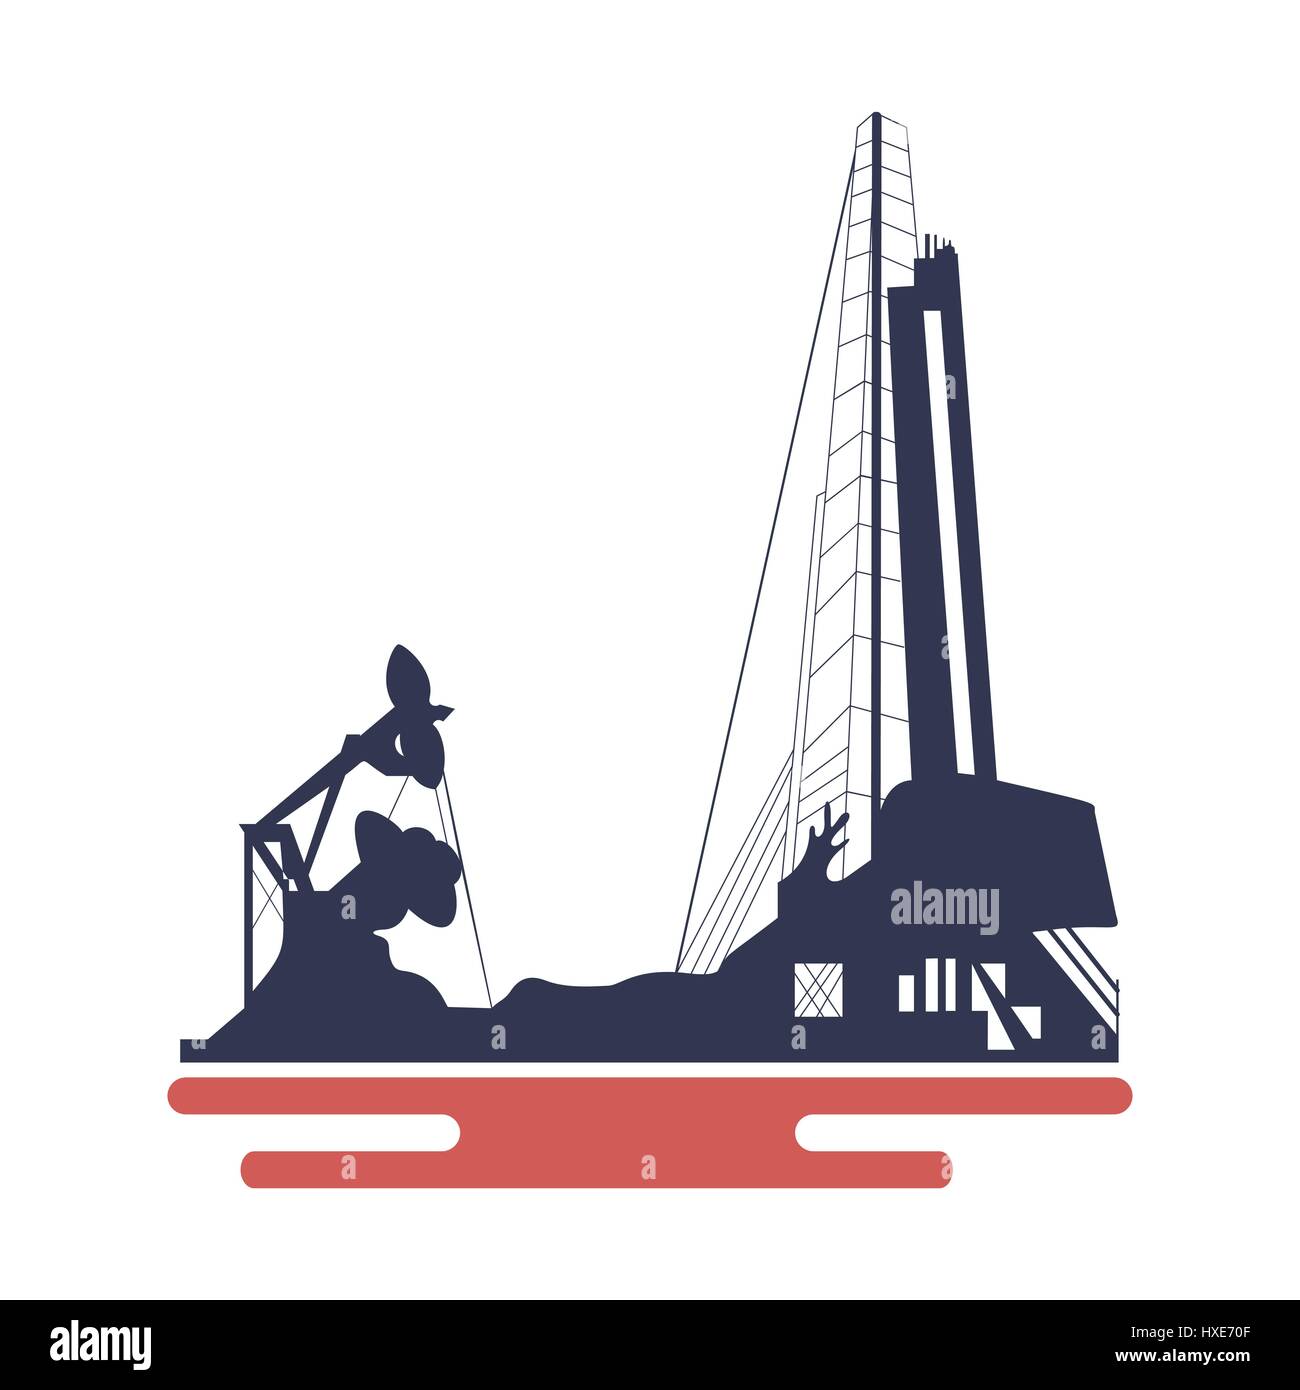 Oil platform icon isolated on white background. Flat design style. Modern vector pictogram for web graphics. Stock Vector